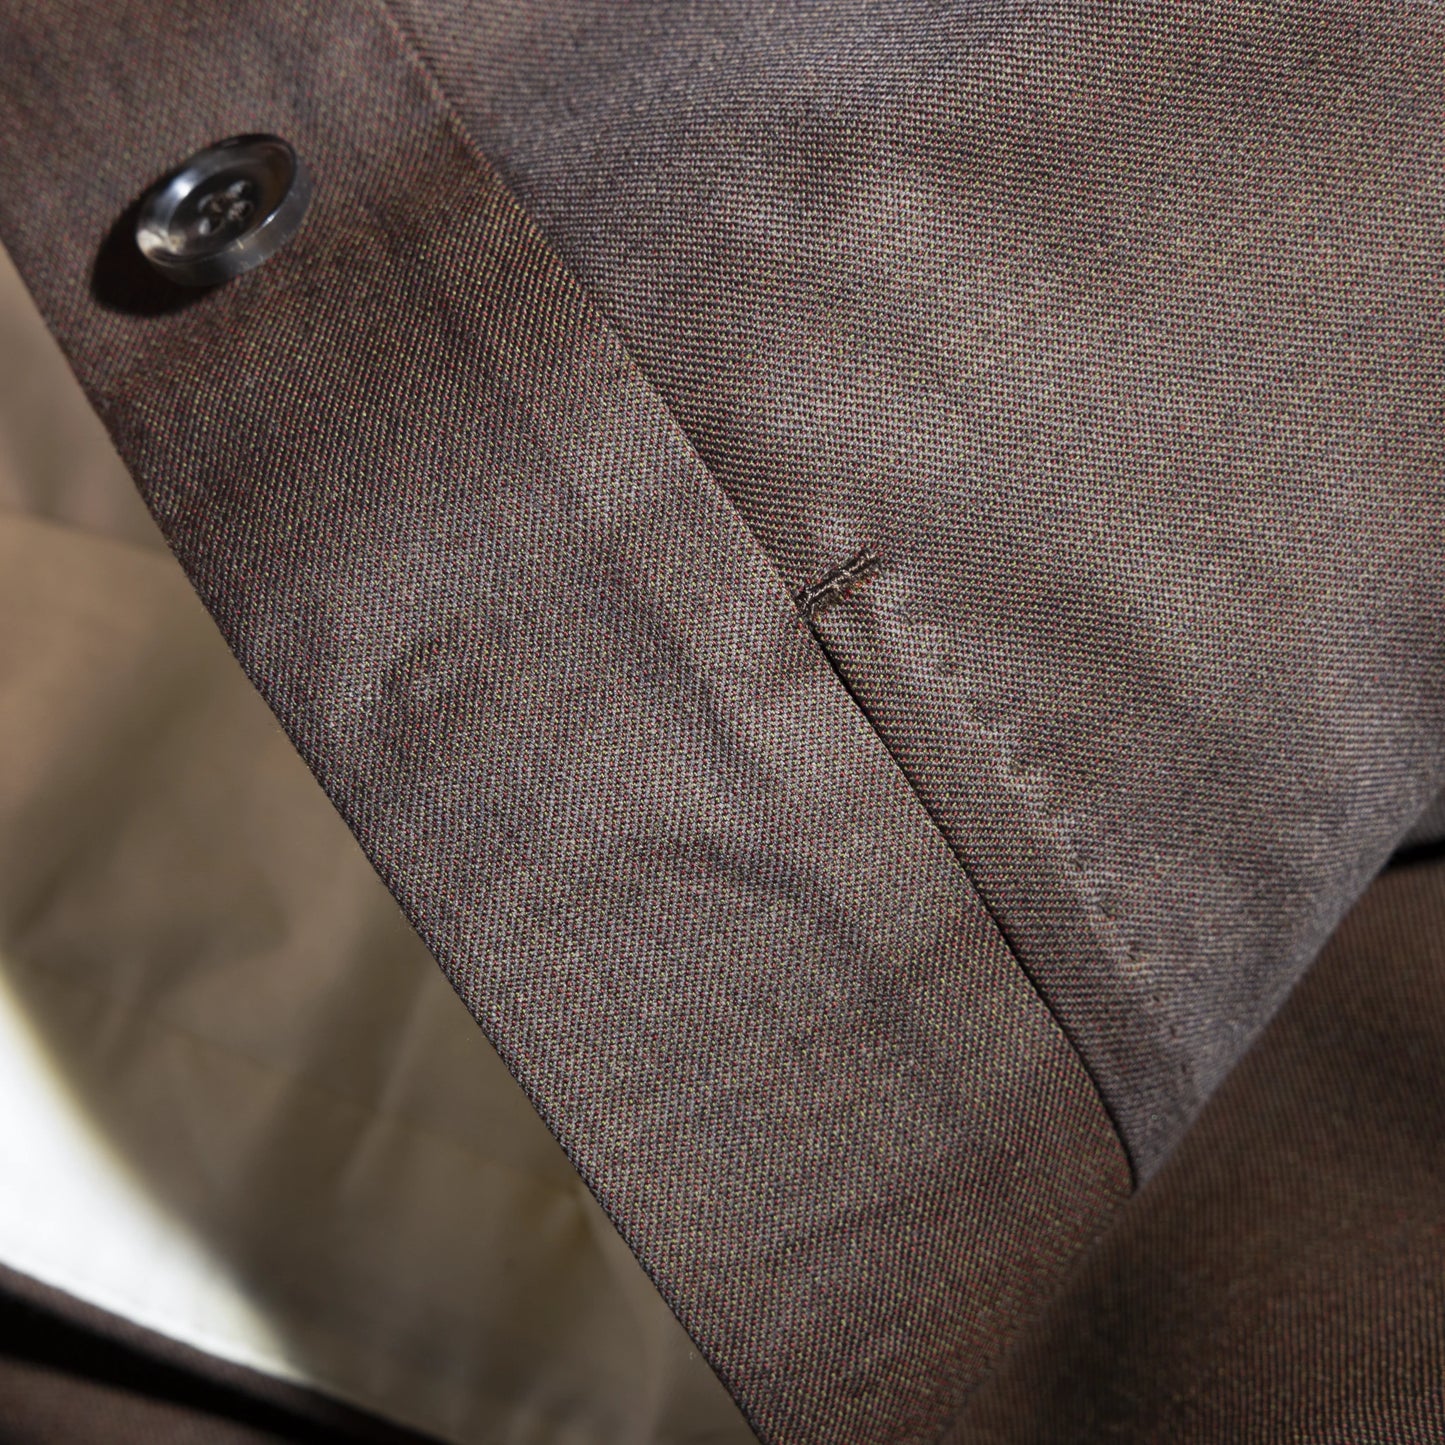 Trousers Lyon brown and olive Wool and Cashmere twill